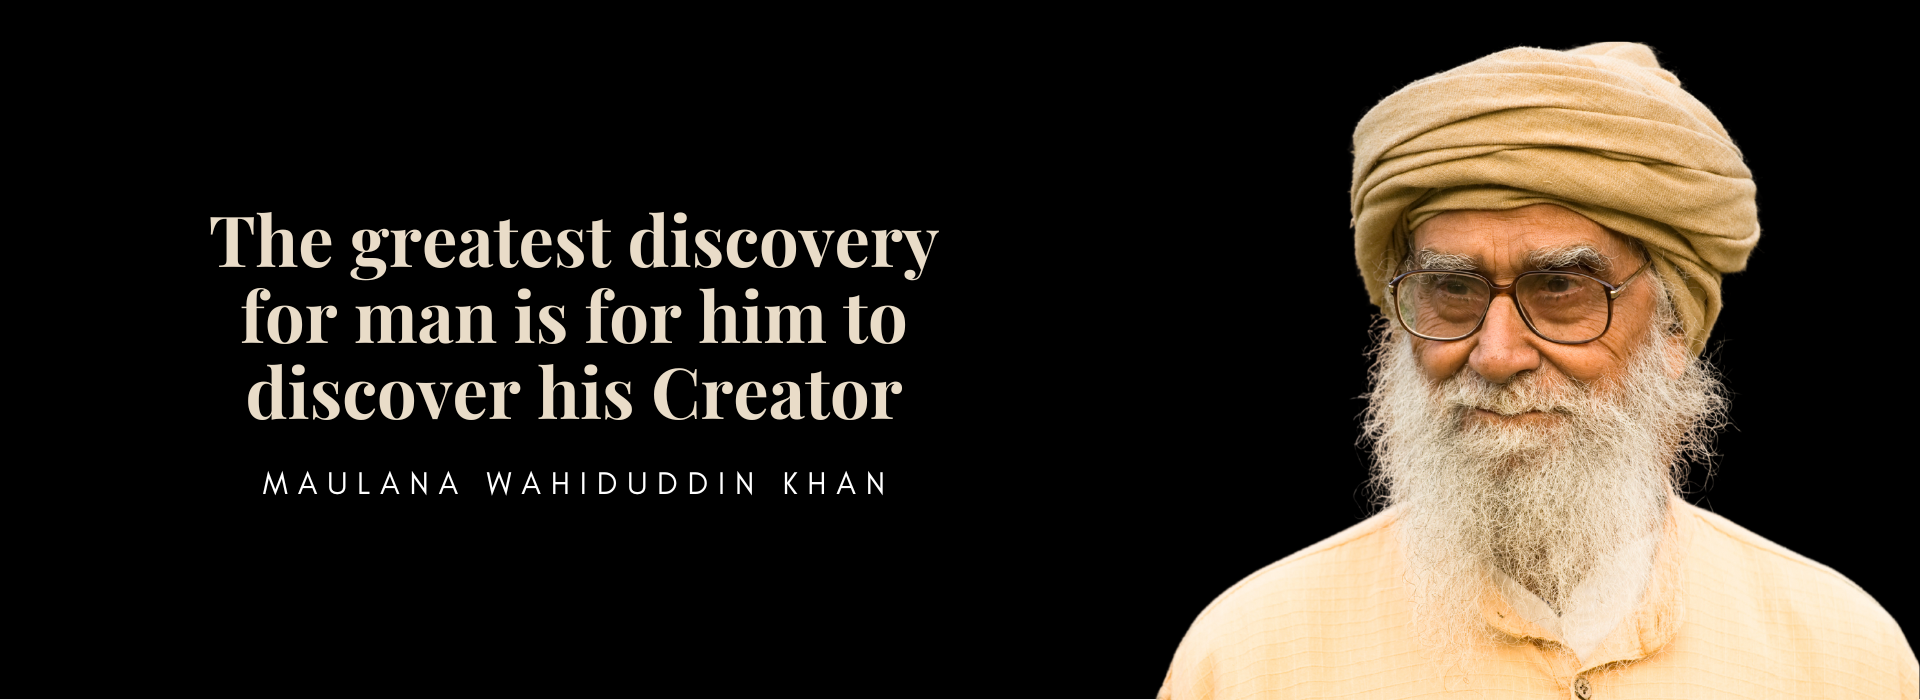 The greatest discovery for man is for him to discover his Creator